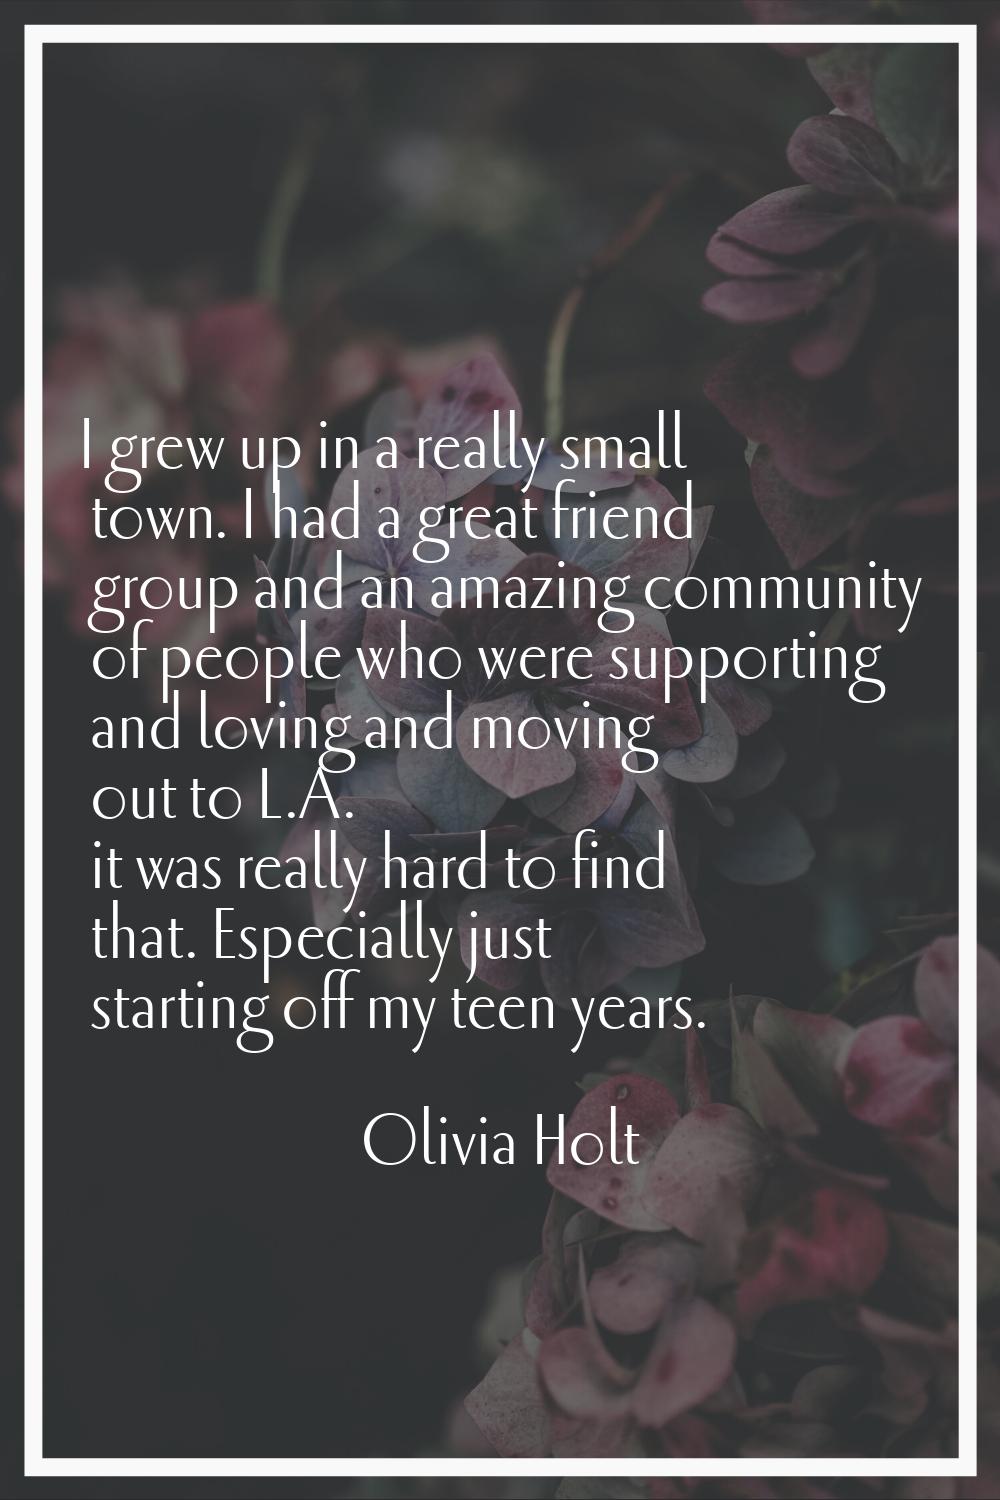 I grew up in a really small town. I had a great friend group and an amazing community of people who